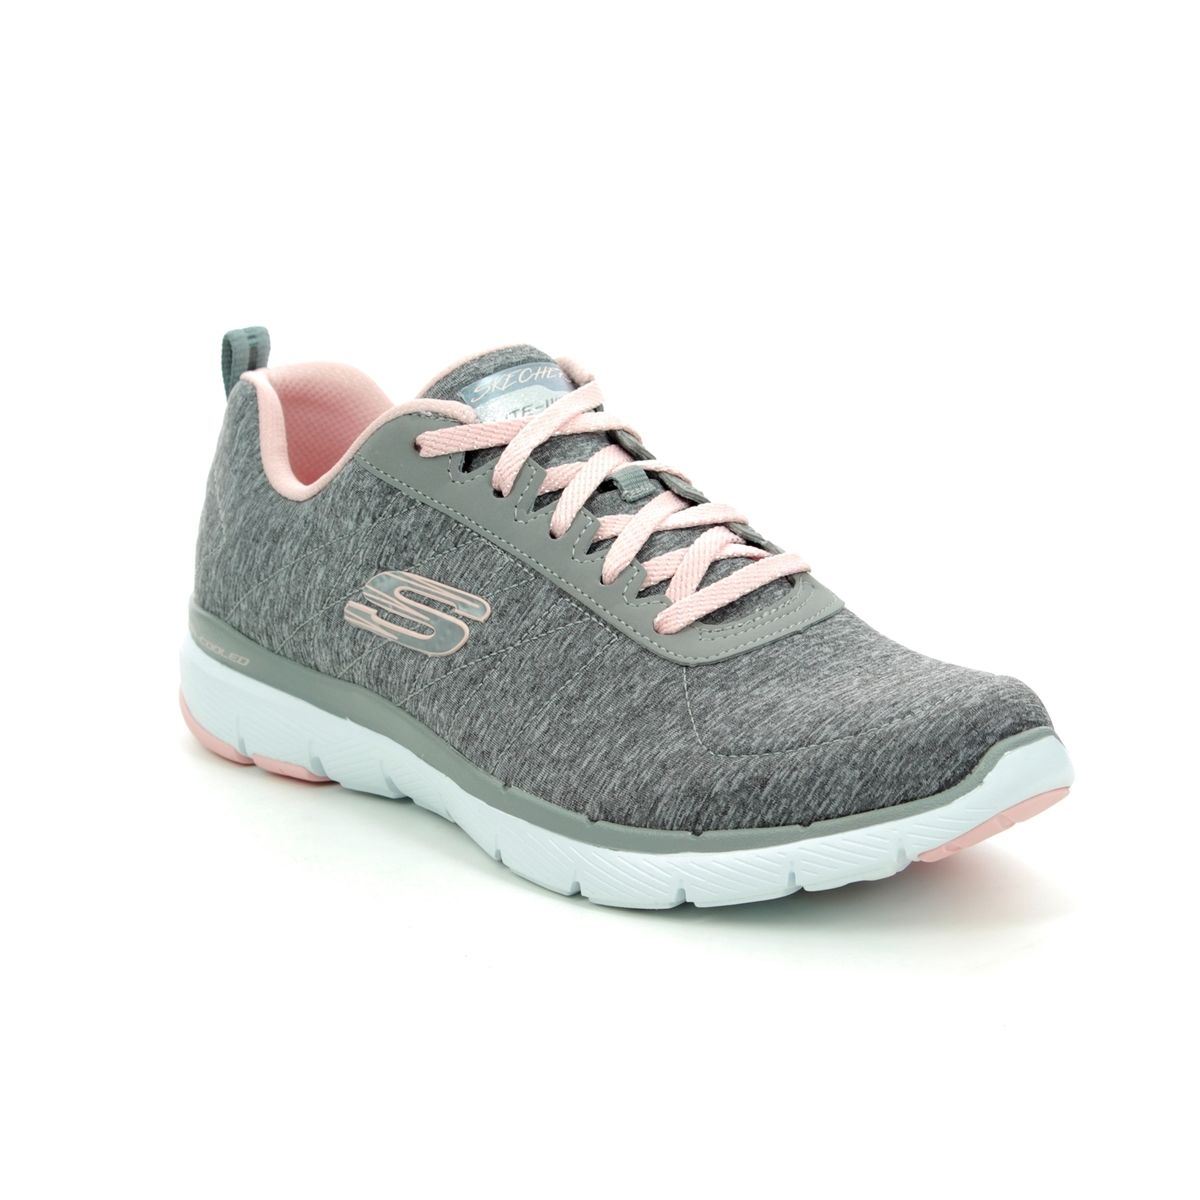 Parity \u003e gray and pink skechers, Up to 